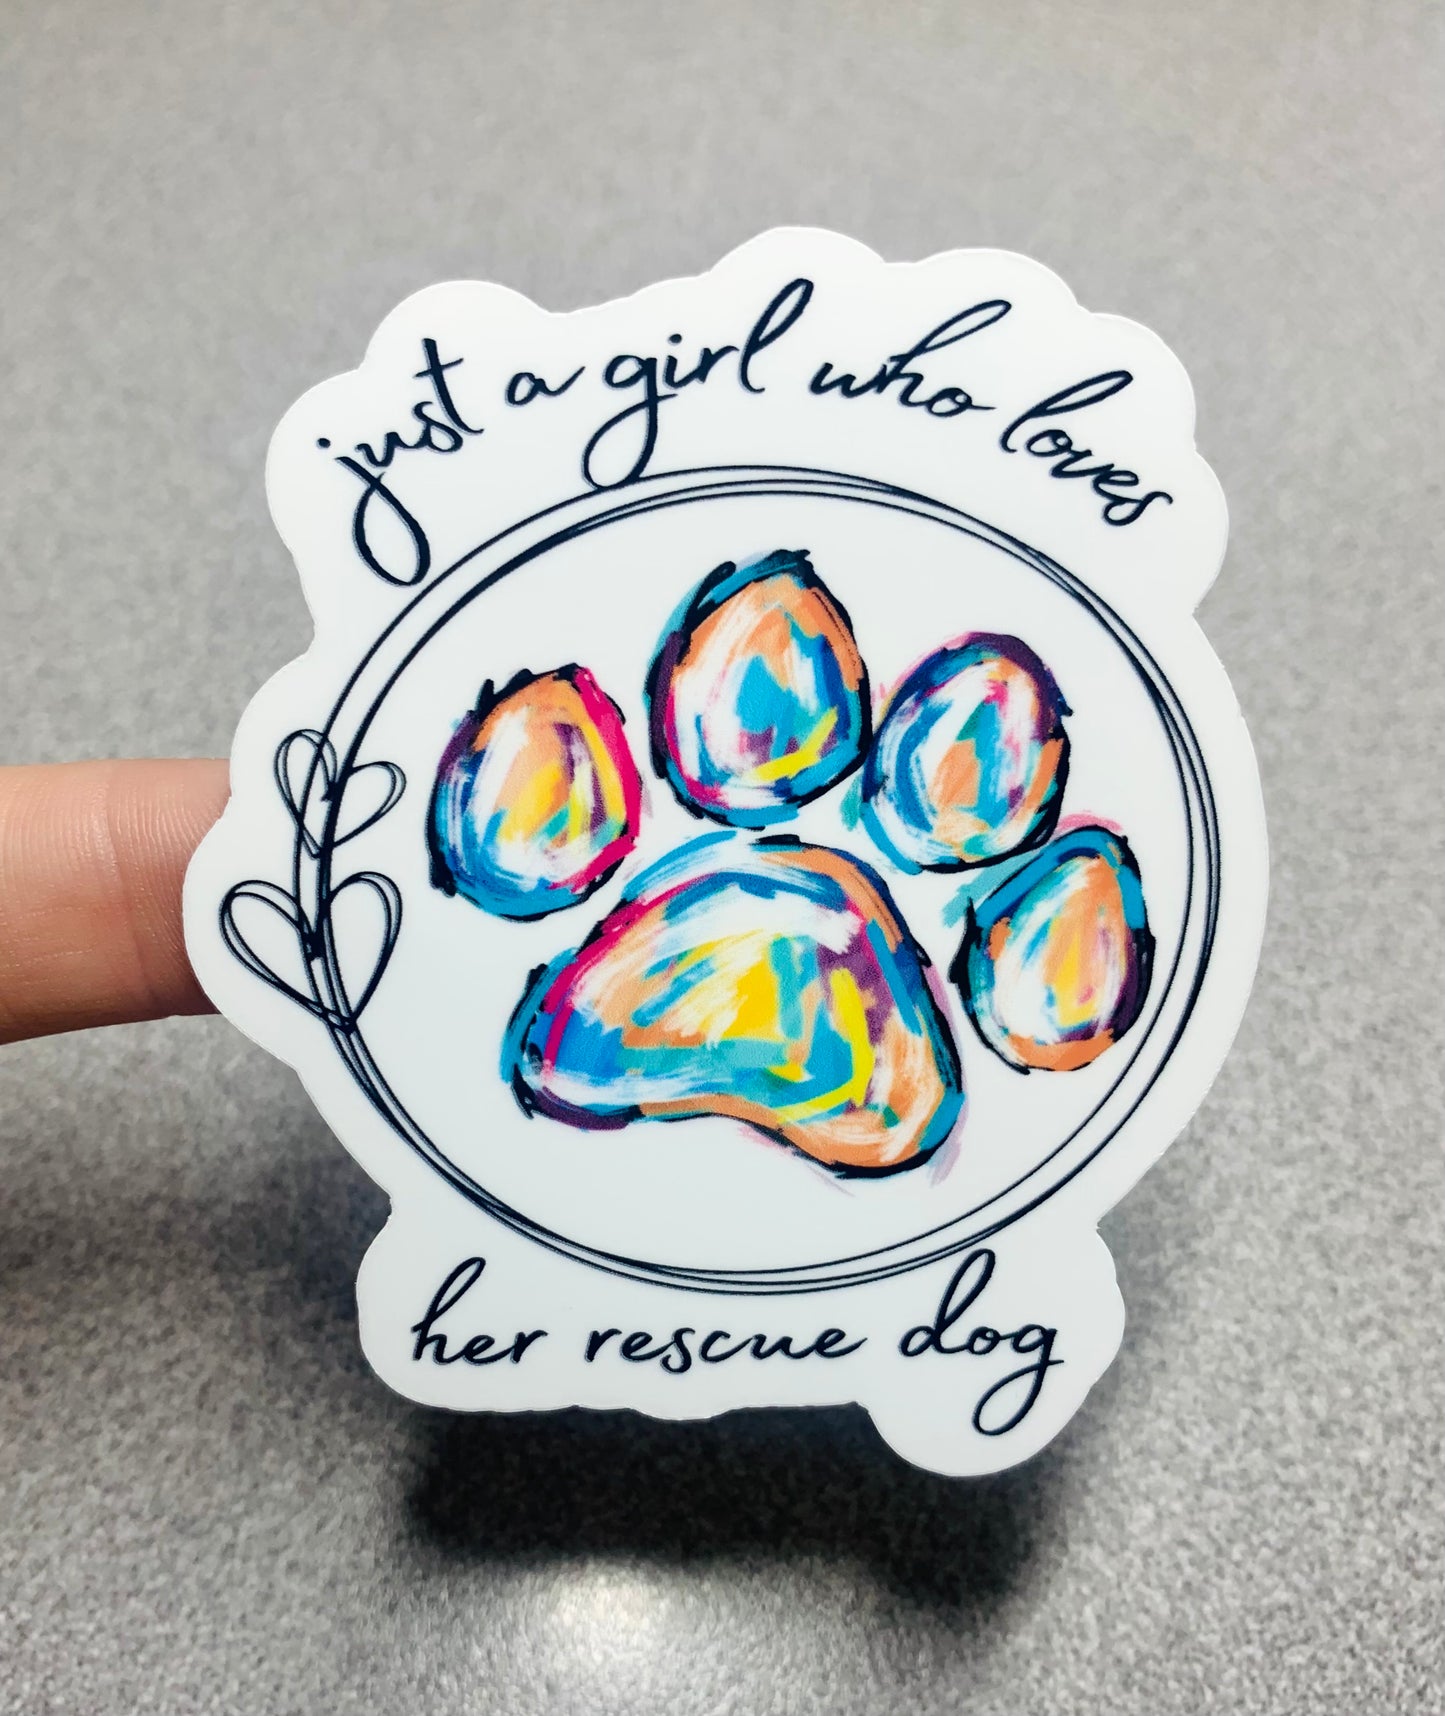 Just a Girl Who Loves Her Rescue Dog Vinyl Sticker Decal - Scent Tree Studio